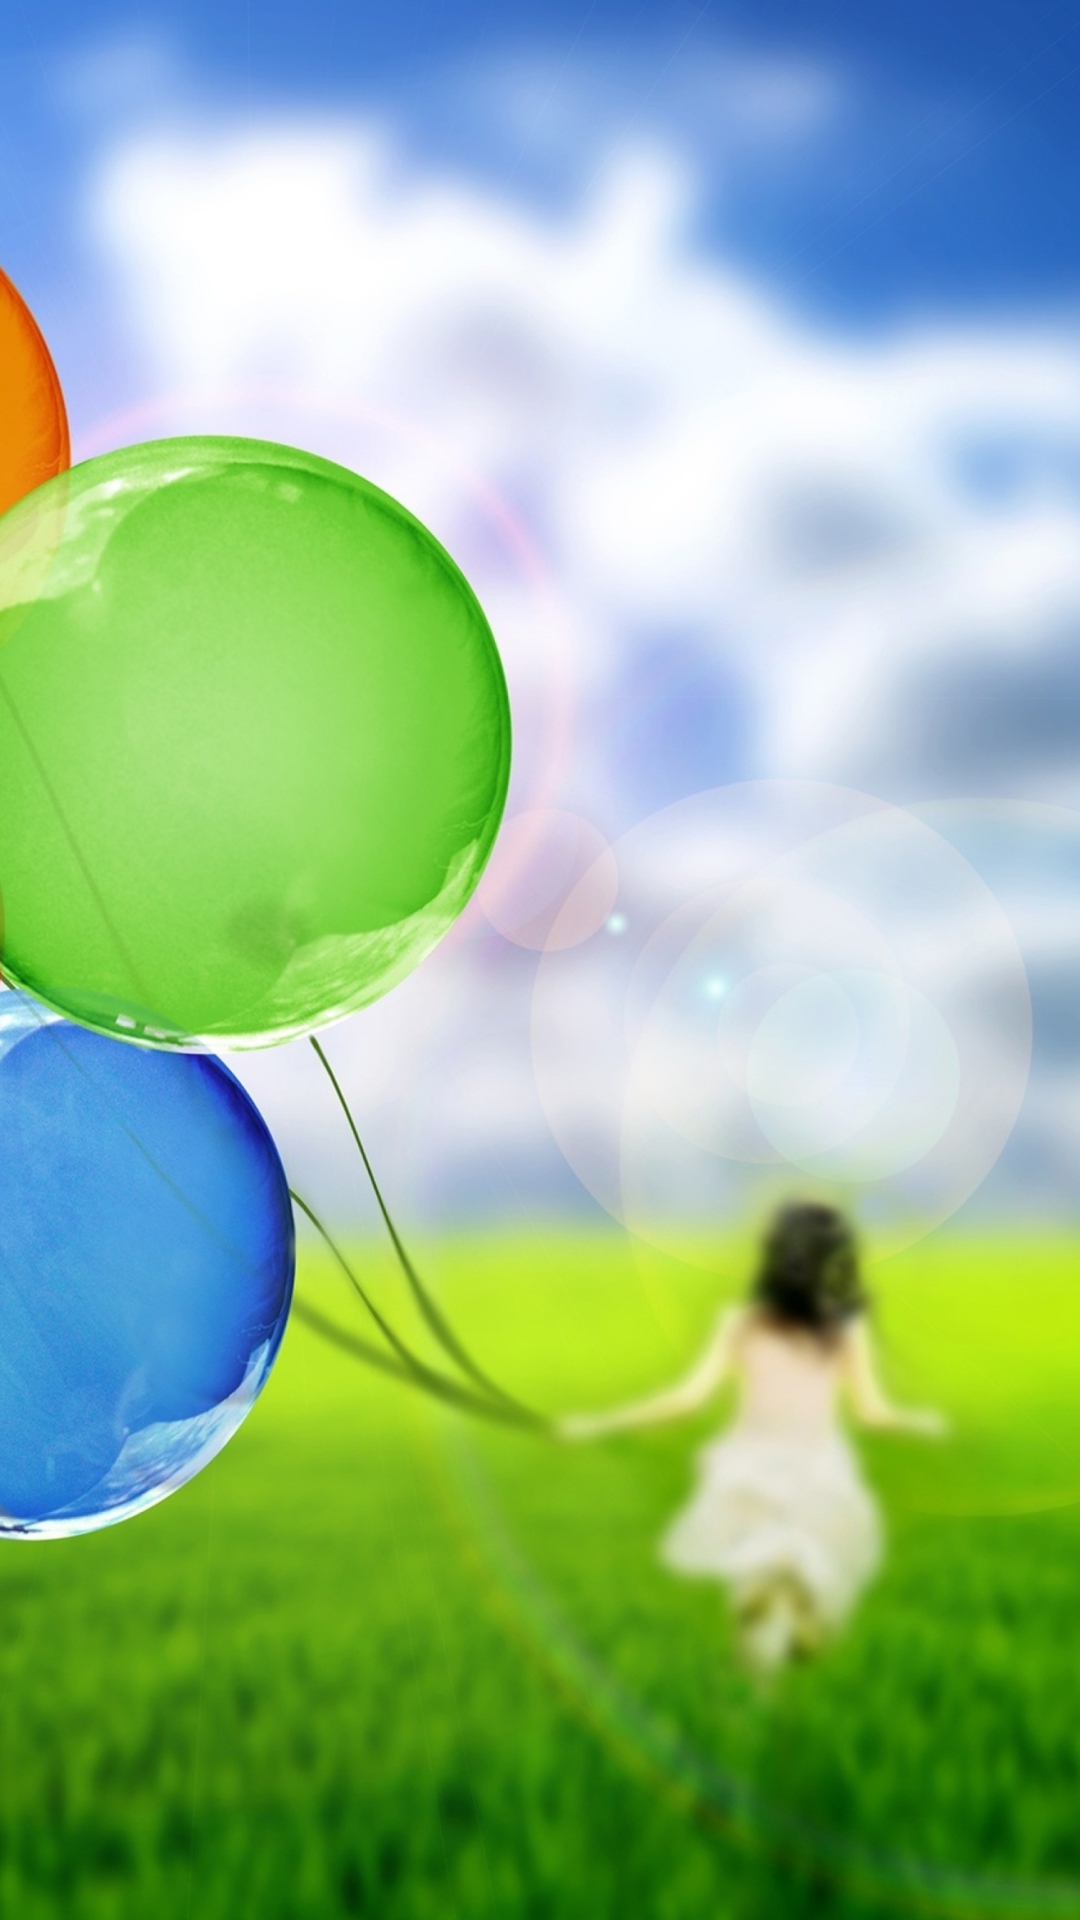 Das Girl Running With Colorful Balloons Wallpaper 1080x1920